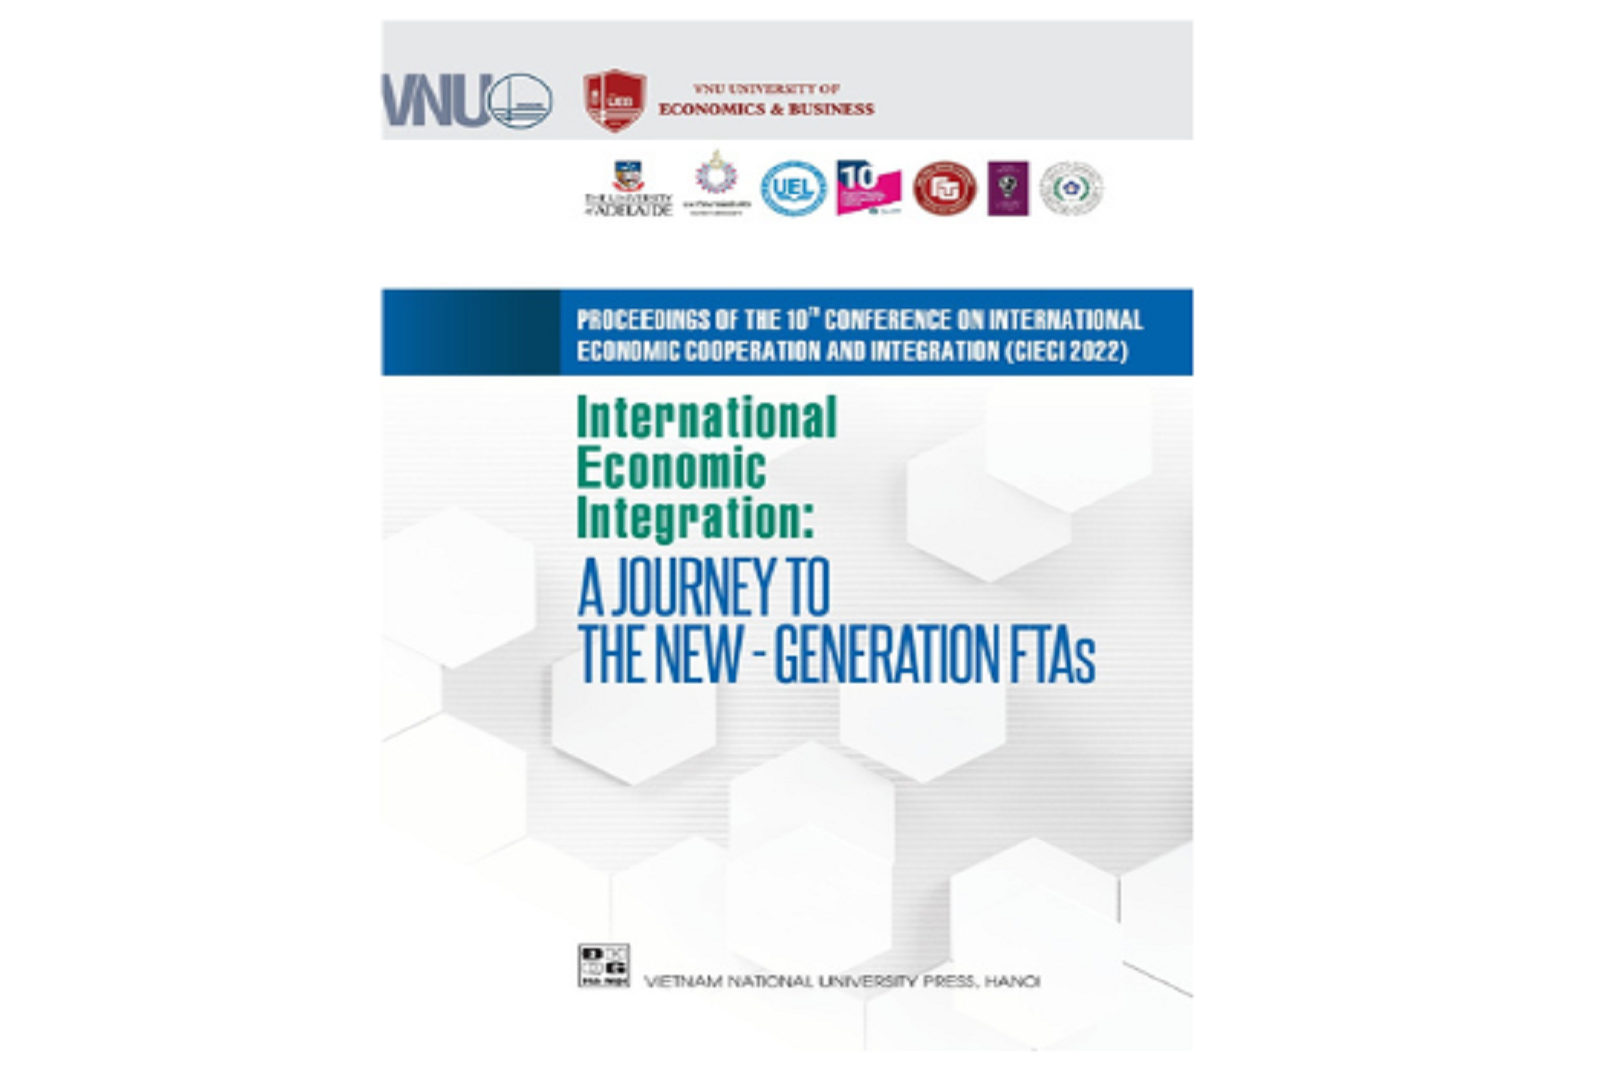 Proceedings of the 10th Conference on International Economic Cooperation and Integration (CIECI 2022) International Economic Integration: A Journey to the New-Generation FTAs